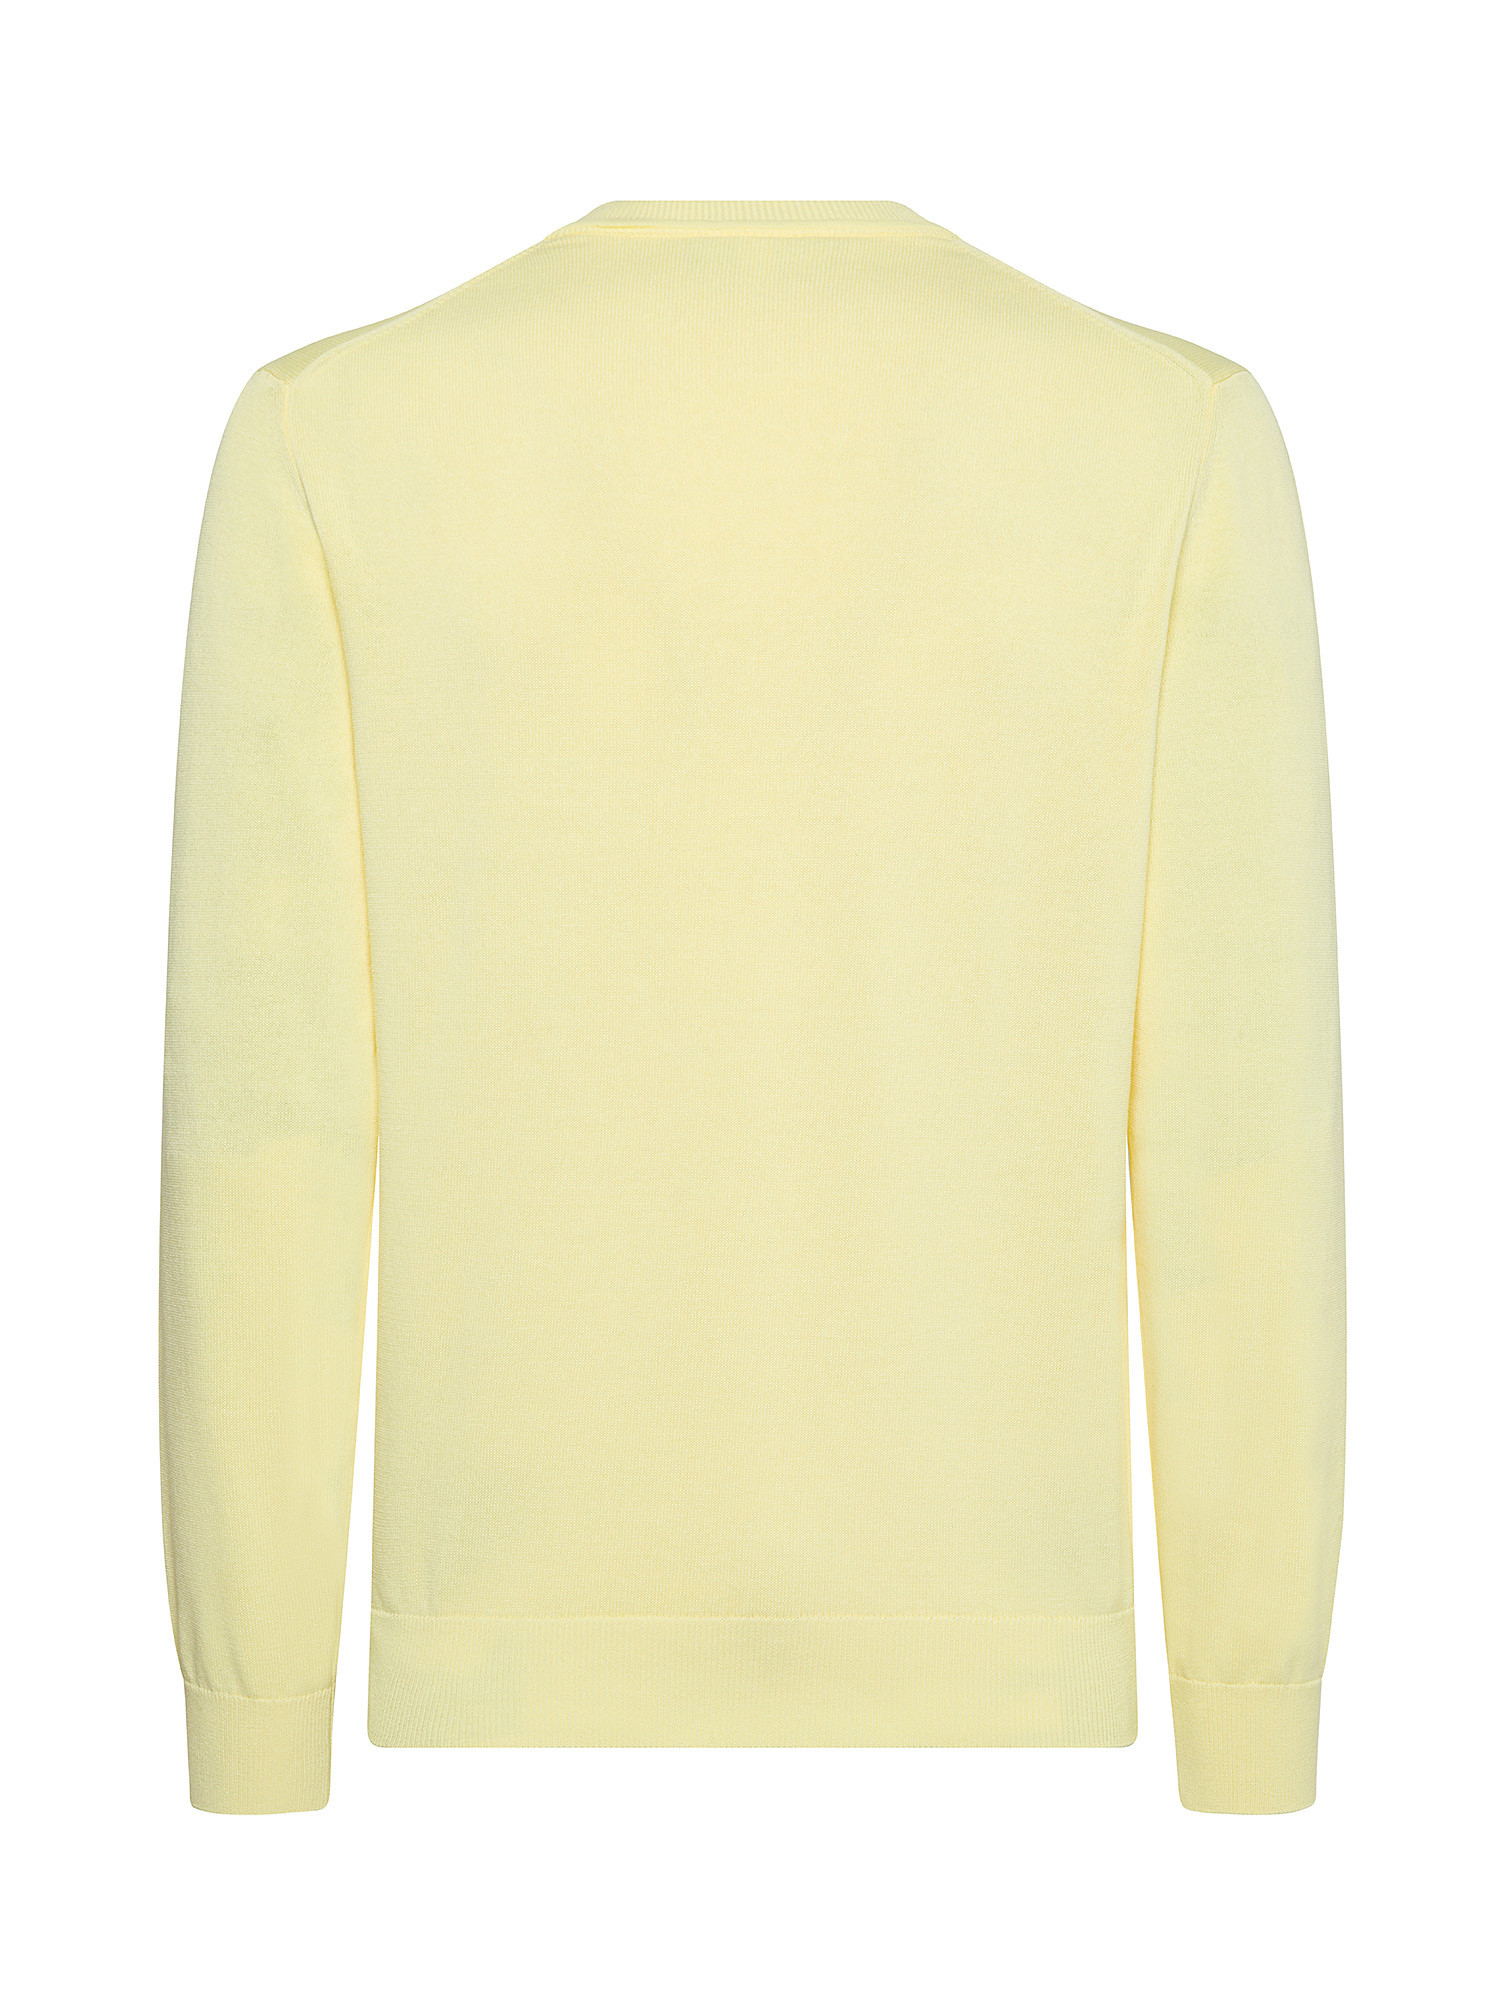 Lacoste - Cotton crewneck sweater, Yellow, large image number 1